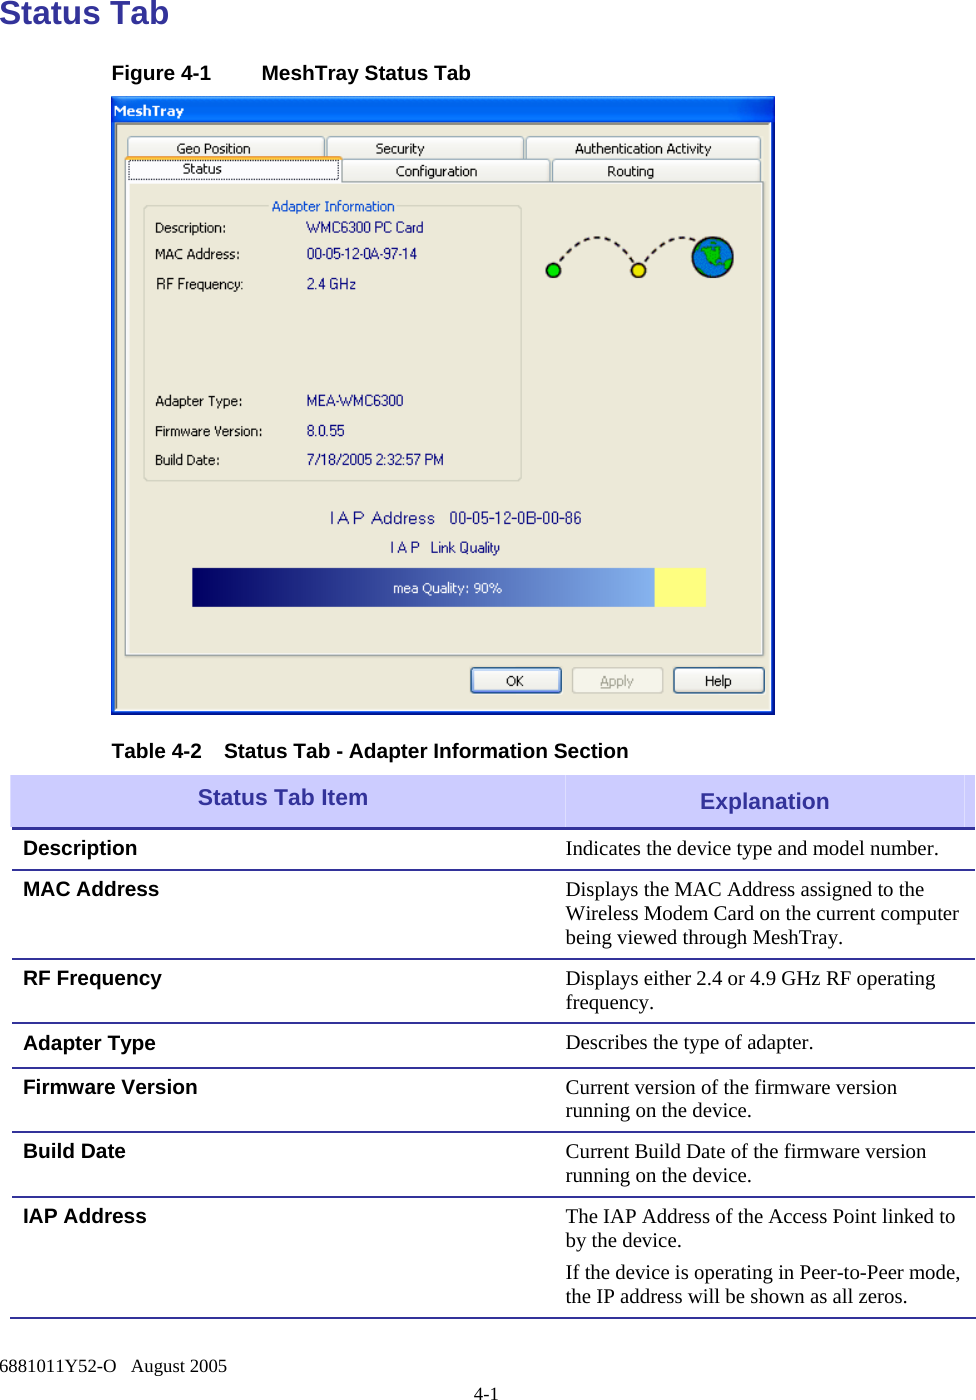  6881011Y52-O   August 2005 4-1 Status Tab Figure 4-1  MeshTray Status Tab  Table 4-2  Status Tab - Adapter Information Section  Status Tab Item   Explanation Description  Indicates the device type and model number. MAC Address  Displays the MAC Address assigned to the Wireless Modem Card on the current computer being viewed through MeshTray. RF Frequency  Displays either 2.4 or 4.9 GHz RF operating frequency. Adapter Type  Describes the type of adapter. Firmware Version  Current version of the firmware version running on the device. Build Date  Current Build Date of the firmware version running on the device. IAP Address  The IAP Address of the Access Point linked to by the device. If the device is operating in Peer-to-Peer mode, the IP address will be shown as all zeros. 